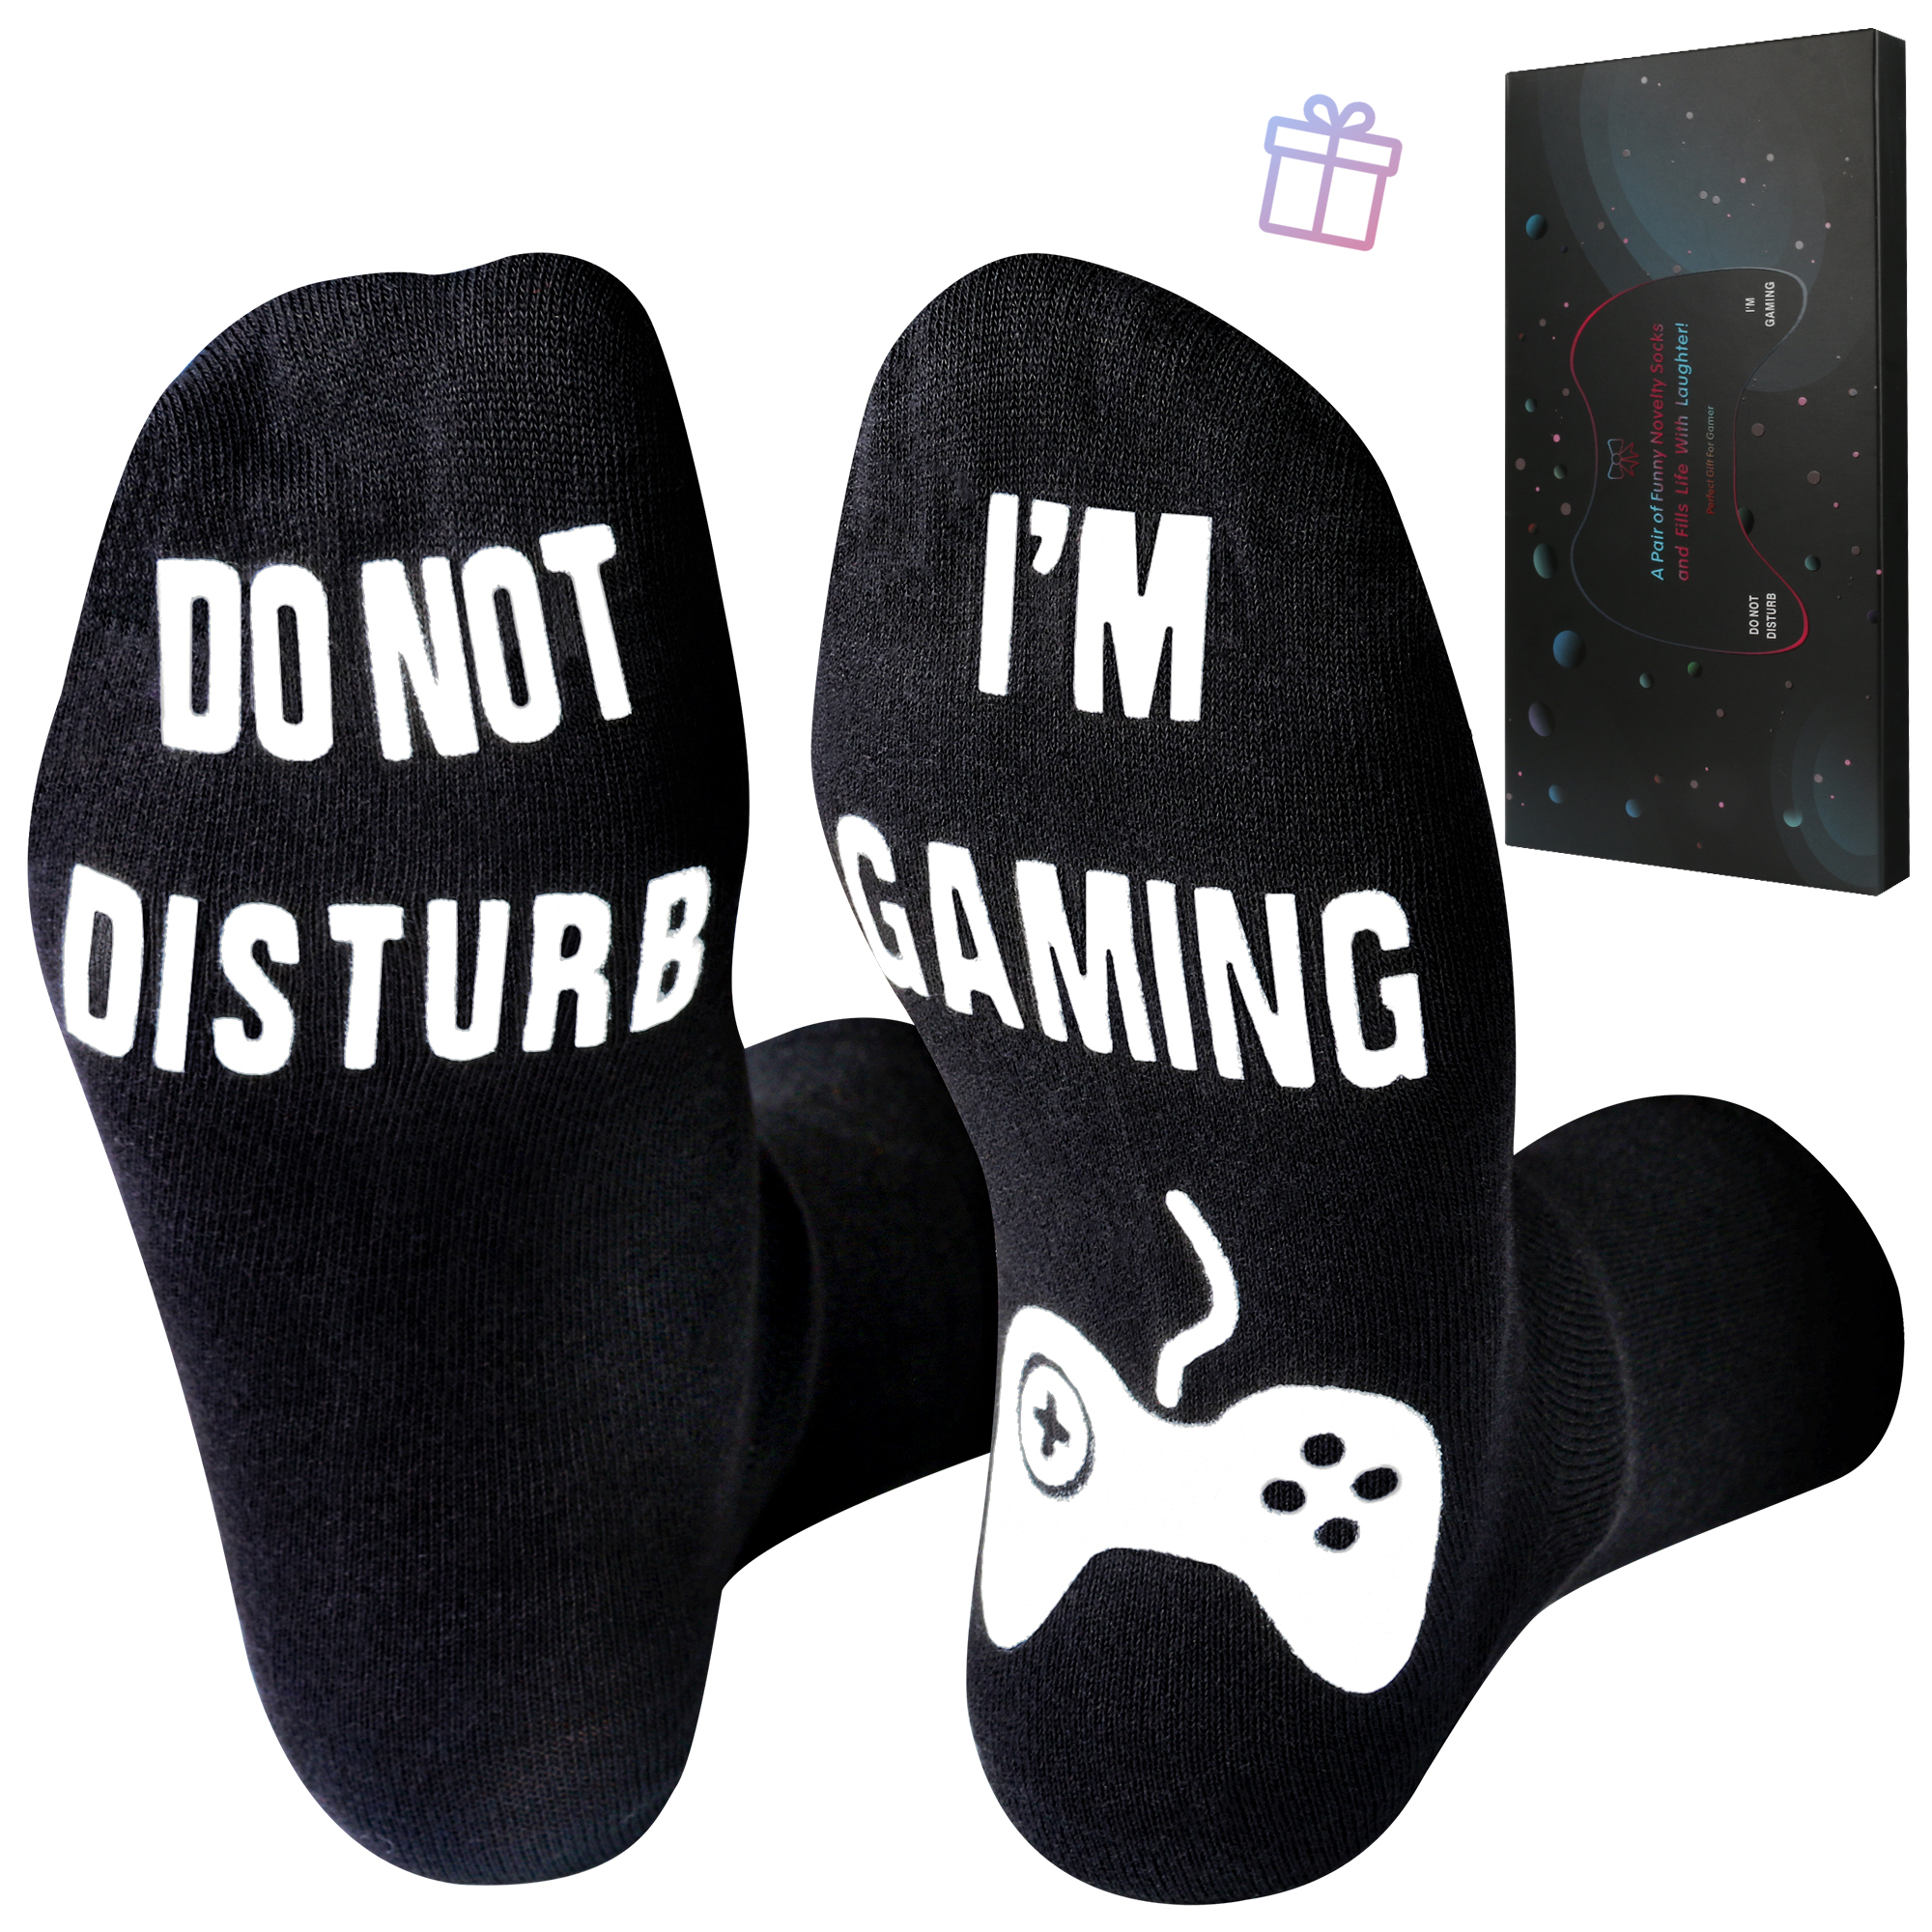 Do Not Disturb I'm Gaming Socks, Mens Gifts for Dad,Christmas Socks Gifts for Him,Gaming Socks Birthday Gift for Teen,Dad,Son